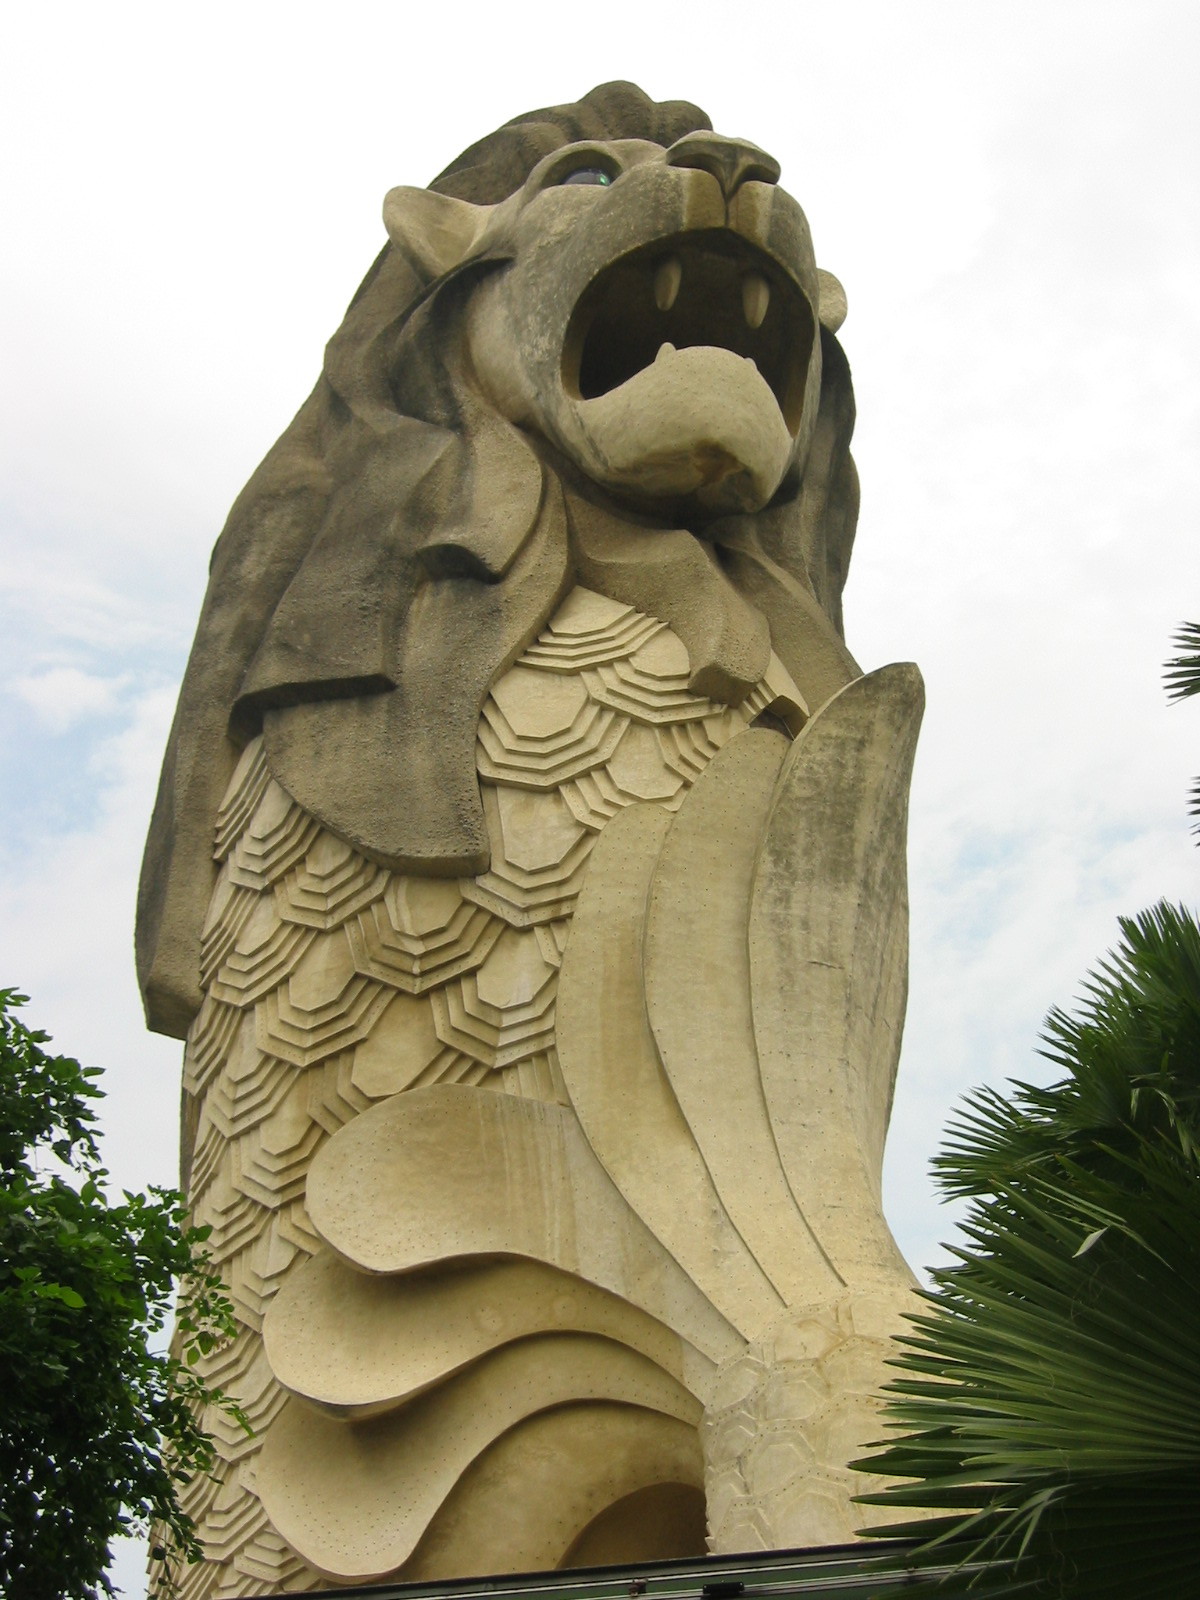 a lion statue is seen in a park setting